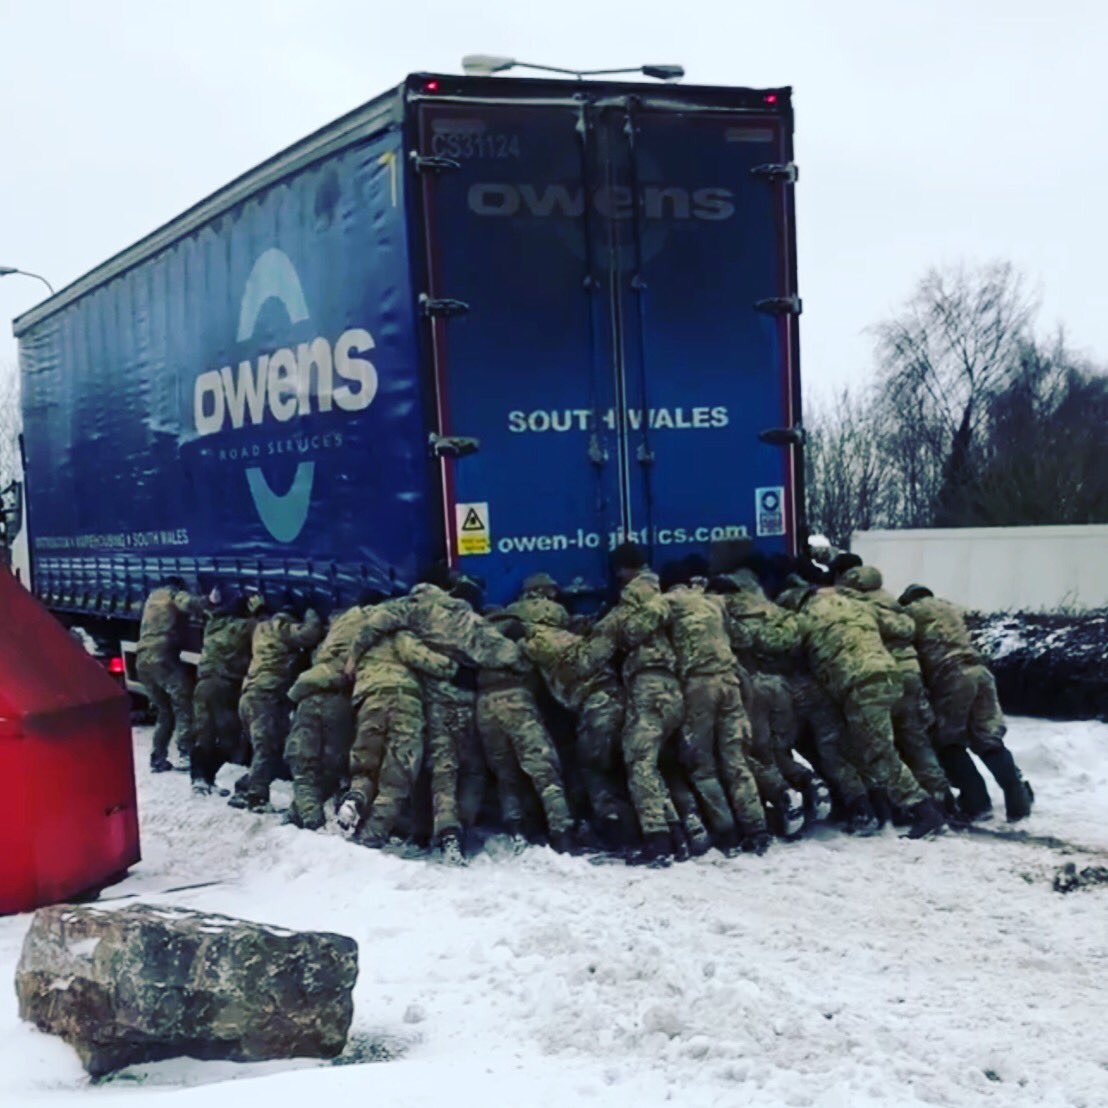 🔵⚪️ #tbt #stormemma #2018 #snow #ice #adverseweather #magor #southwales #royalmaries #totherescue #thankyou #safe #keepsafe #owensspotters #owensgroup ❄️